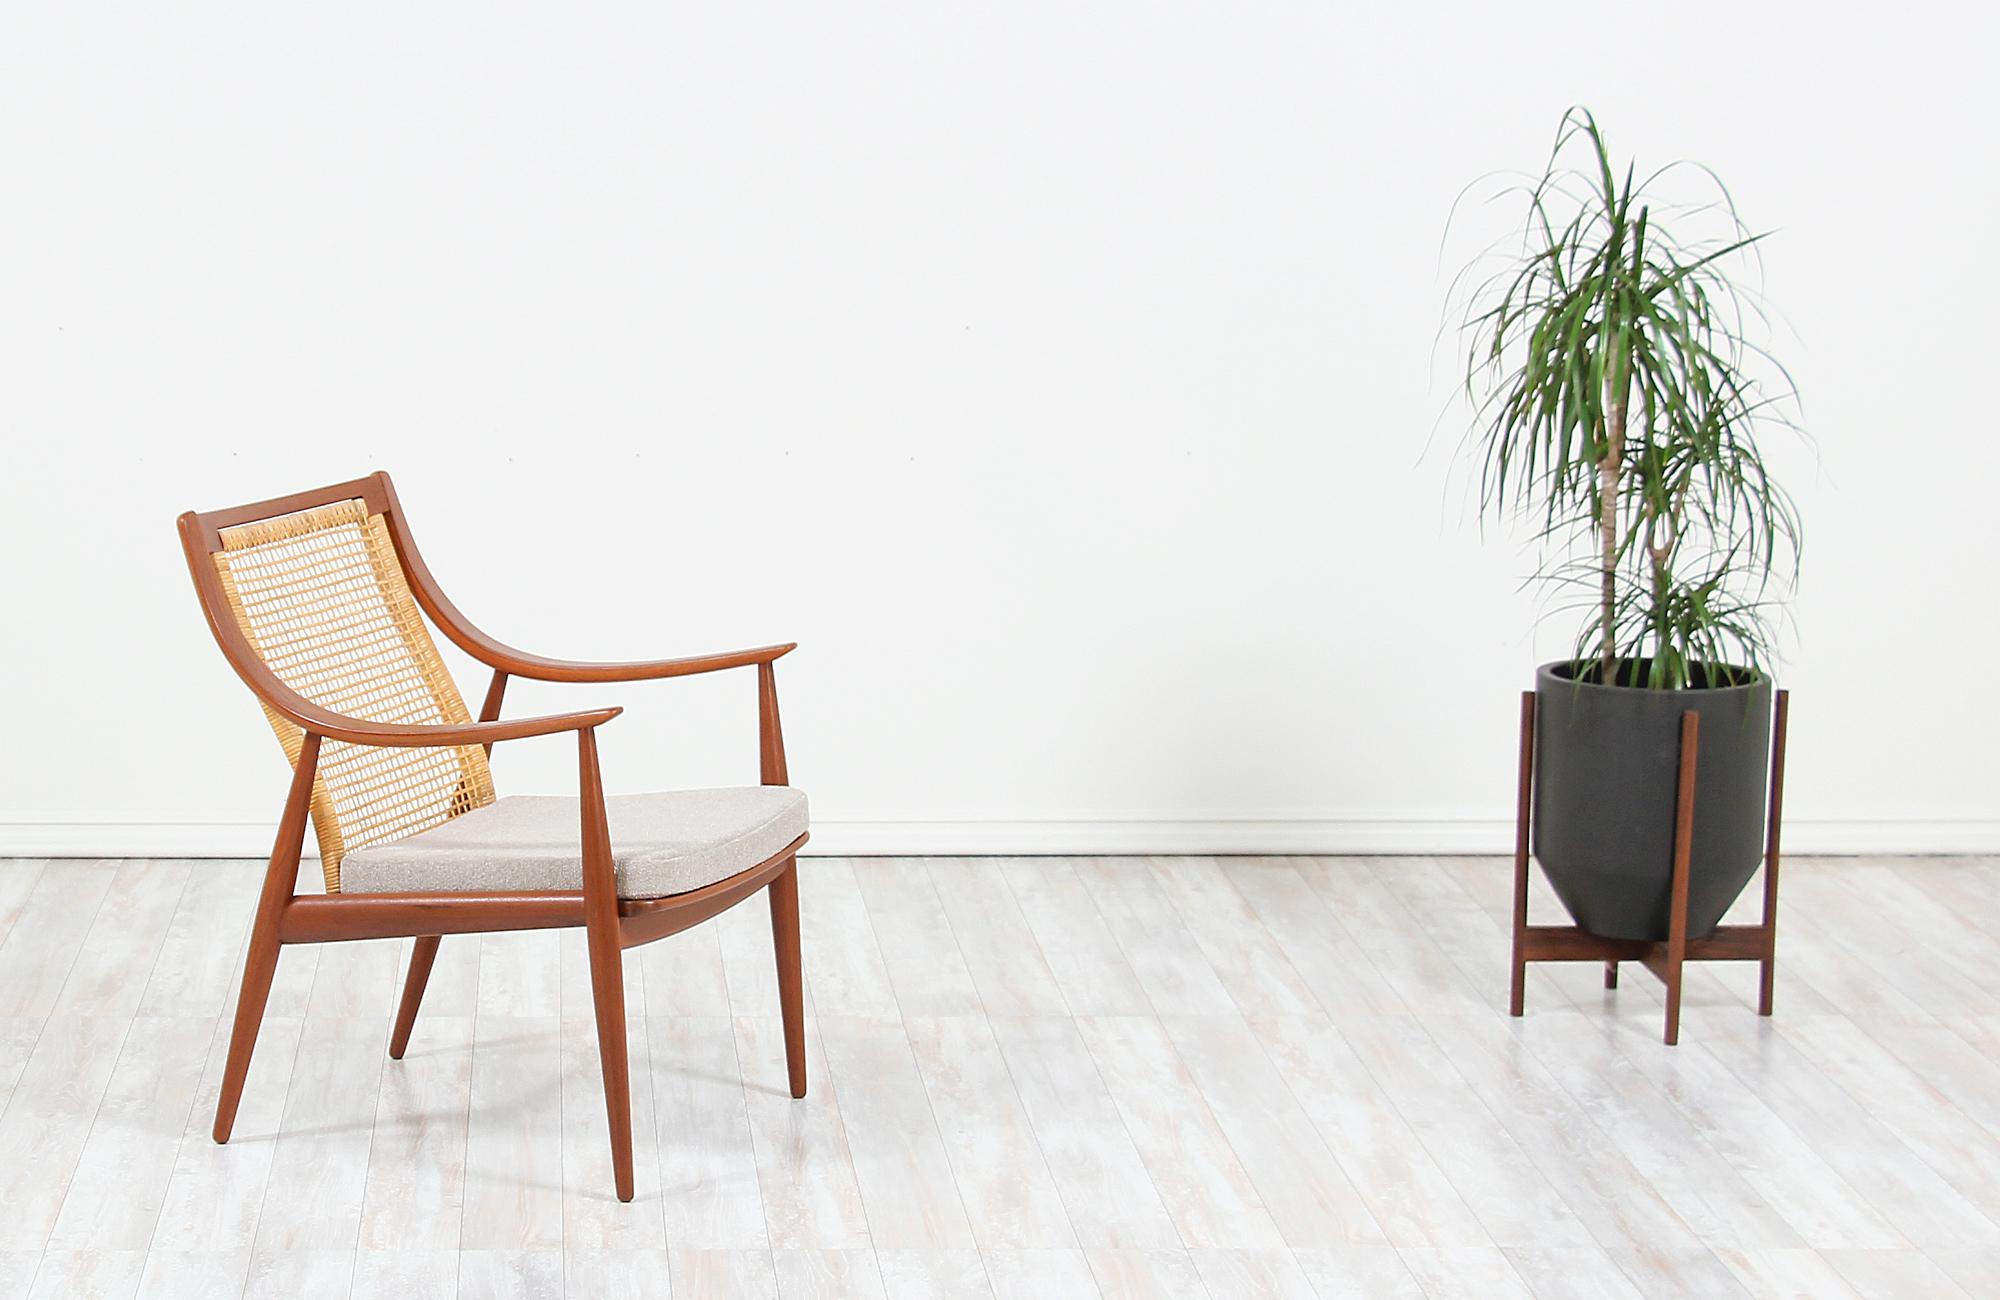 Elegant modern lounge chairs designed by Peter Hvidt & Orla Mølgaard-Nielsen for France & Daverkosen in Denmark, circa 1950s. This spectacular chair model FD-146 features a sturdy teak wood frame with a recently upholstered seat in a quality soft